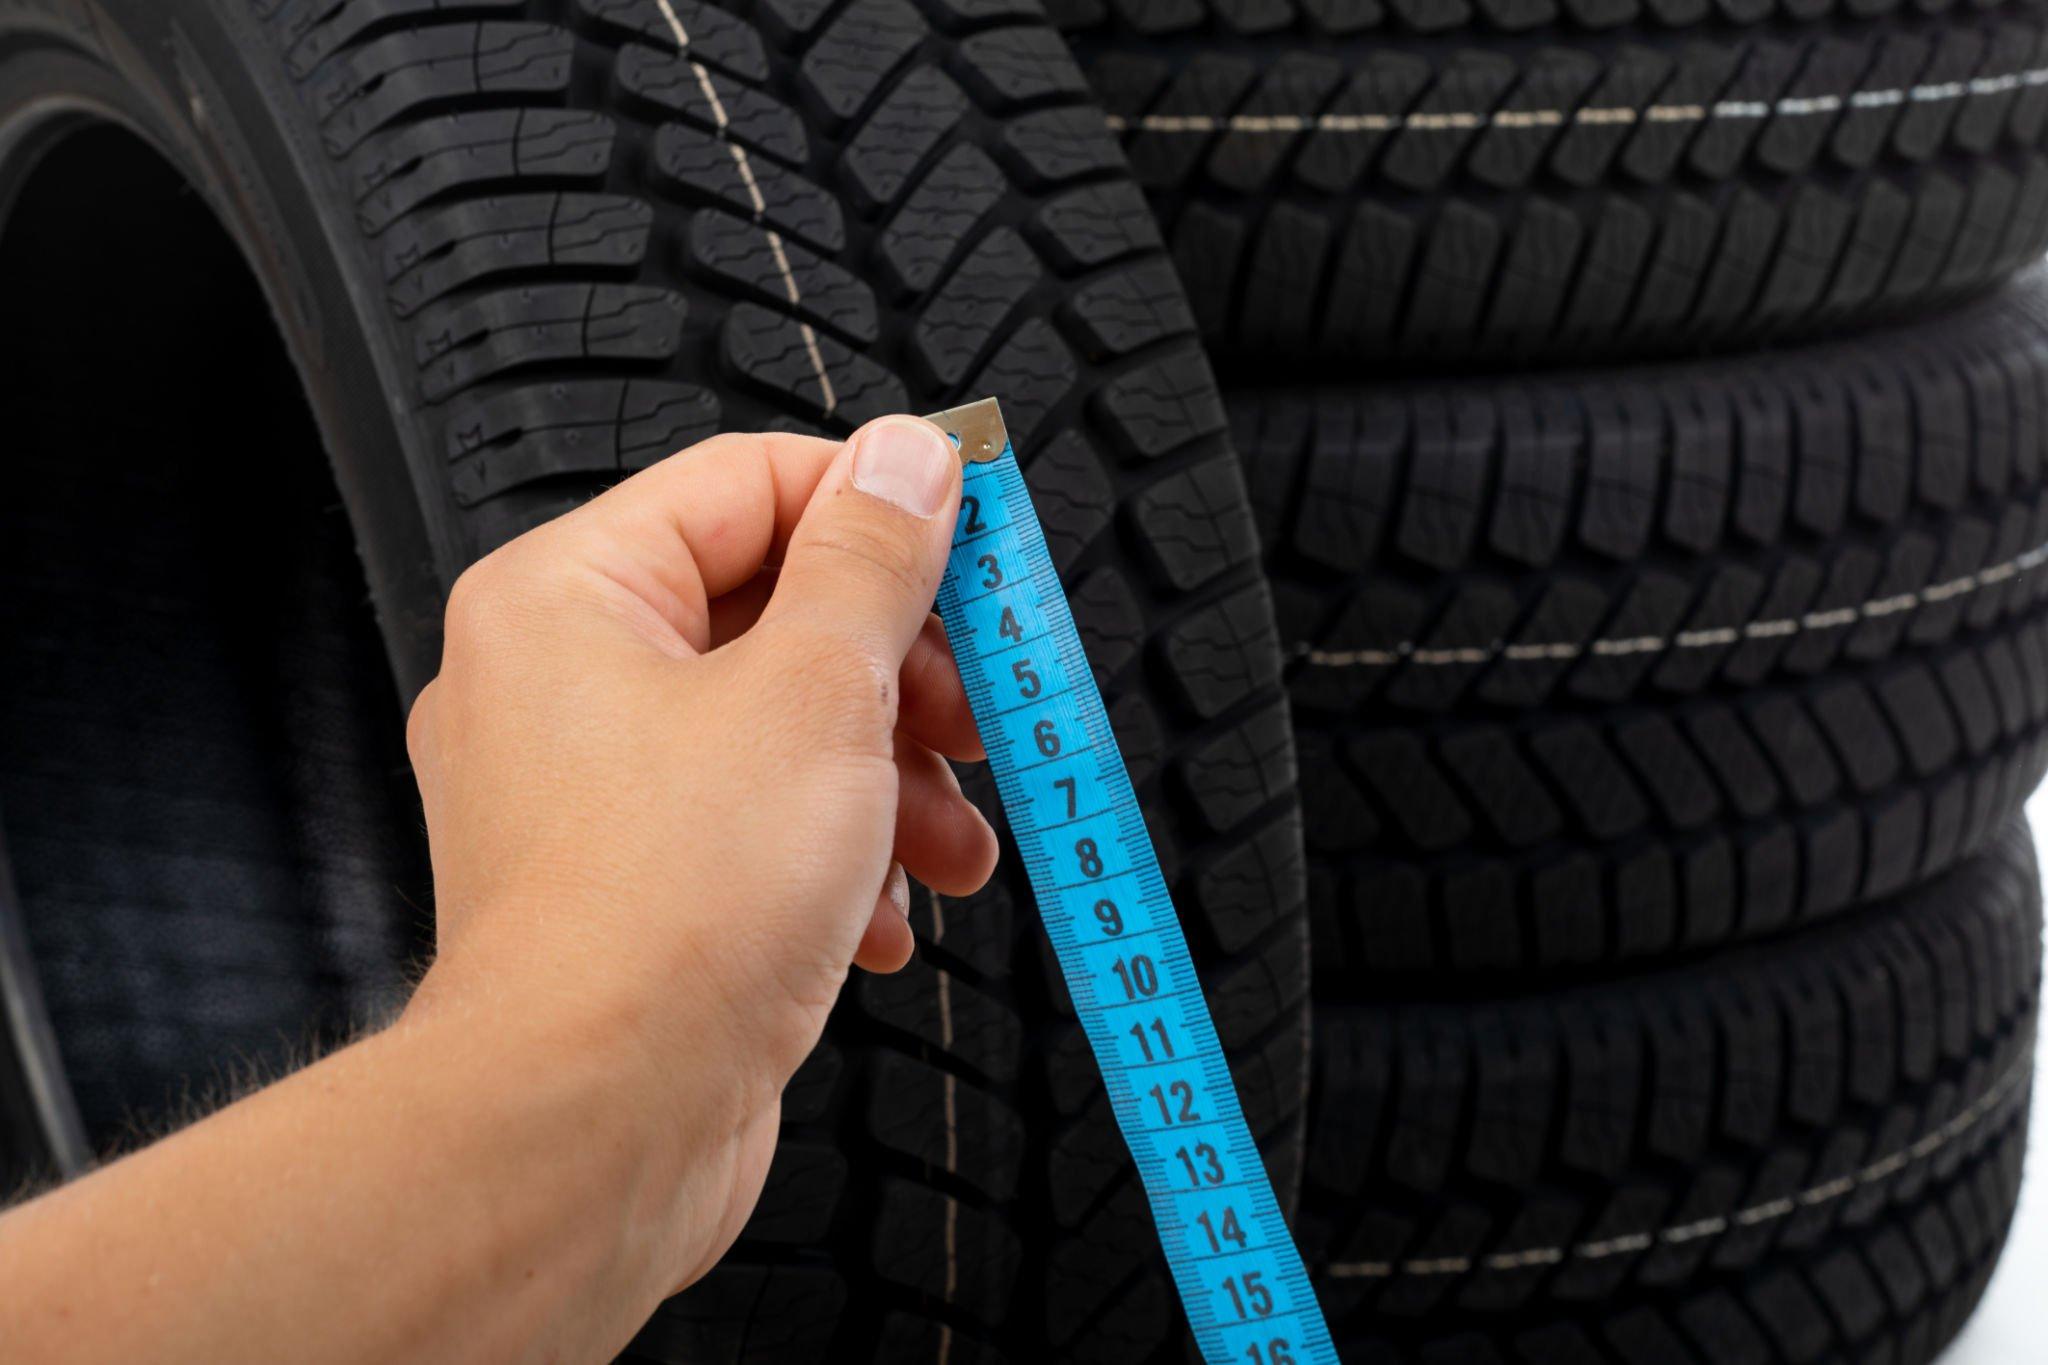 Discover How to Find Your Tire Size Quickly and Accurately